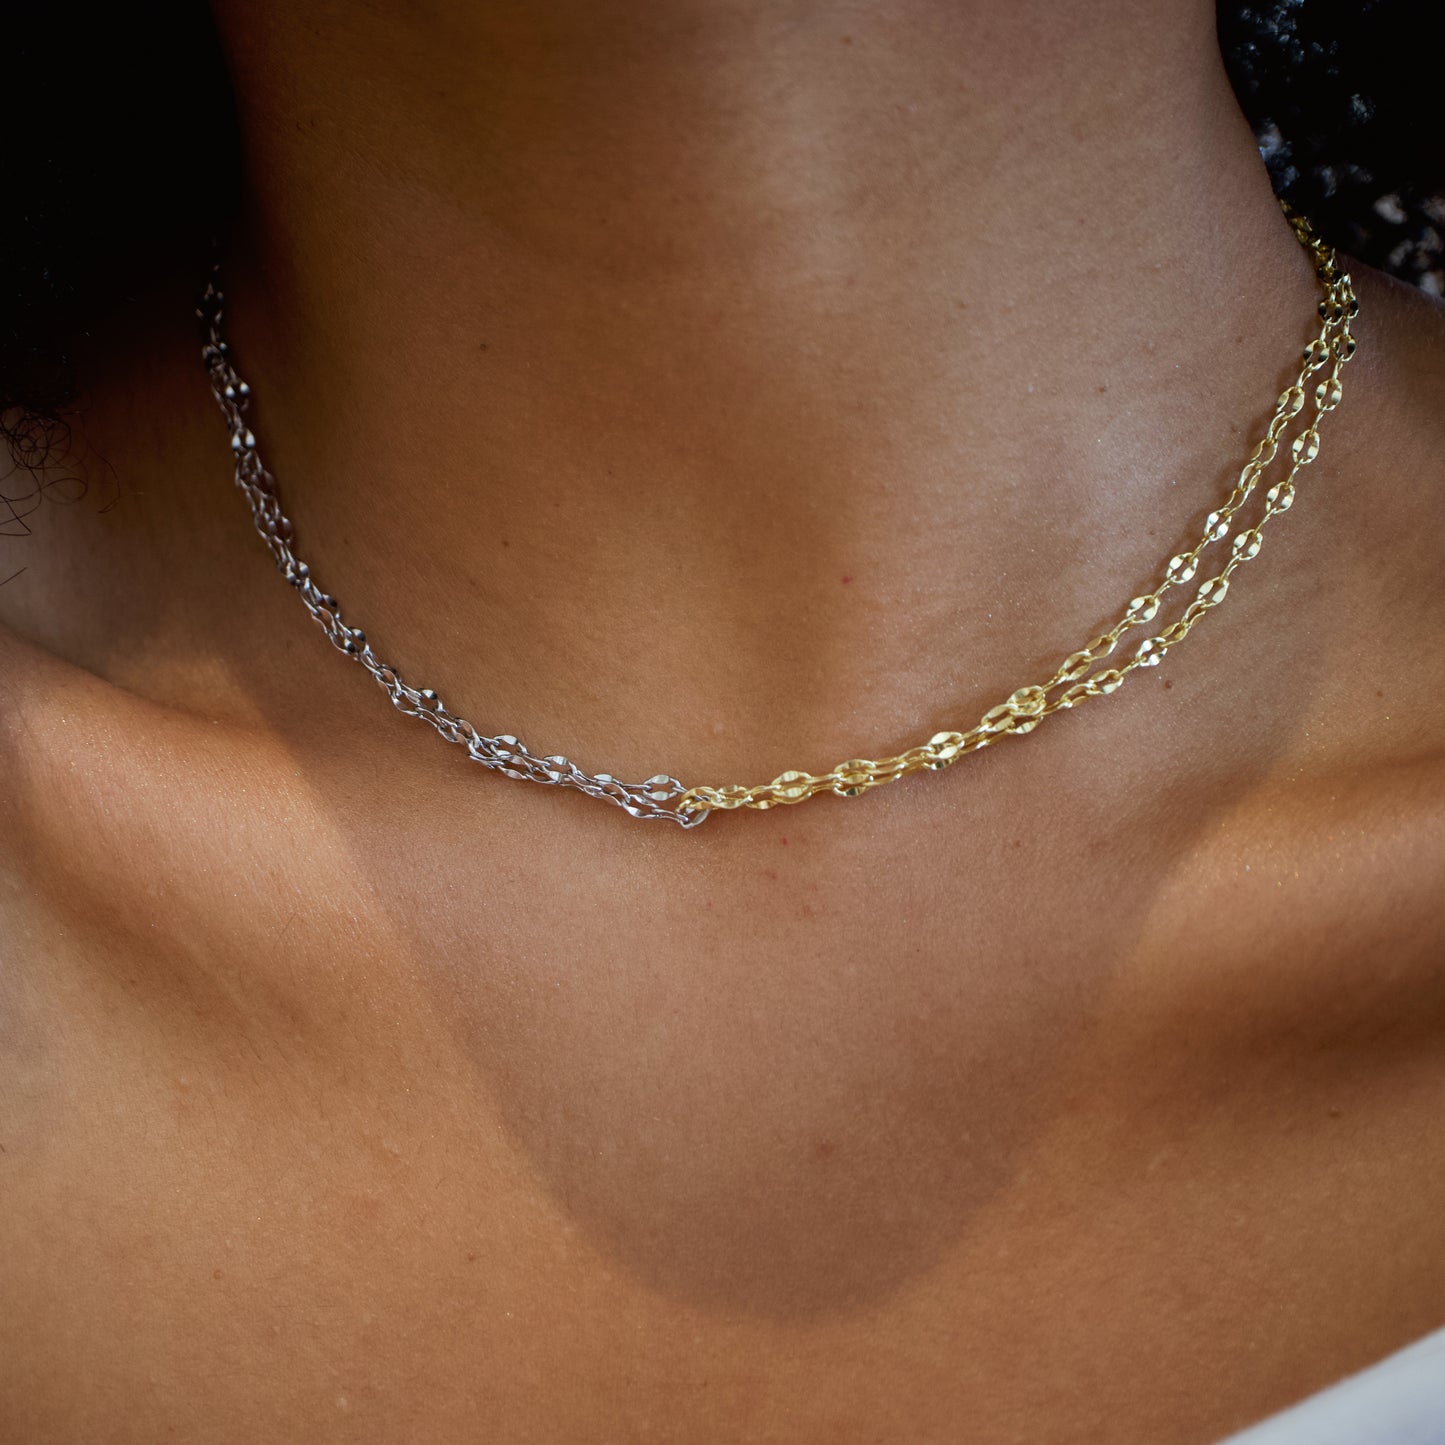 Looped Chains Silver and Gold Necklace Abu Dhabi UAE